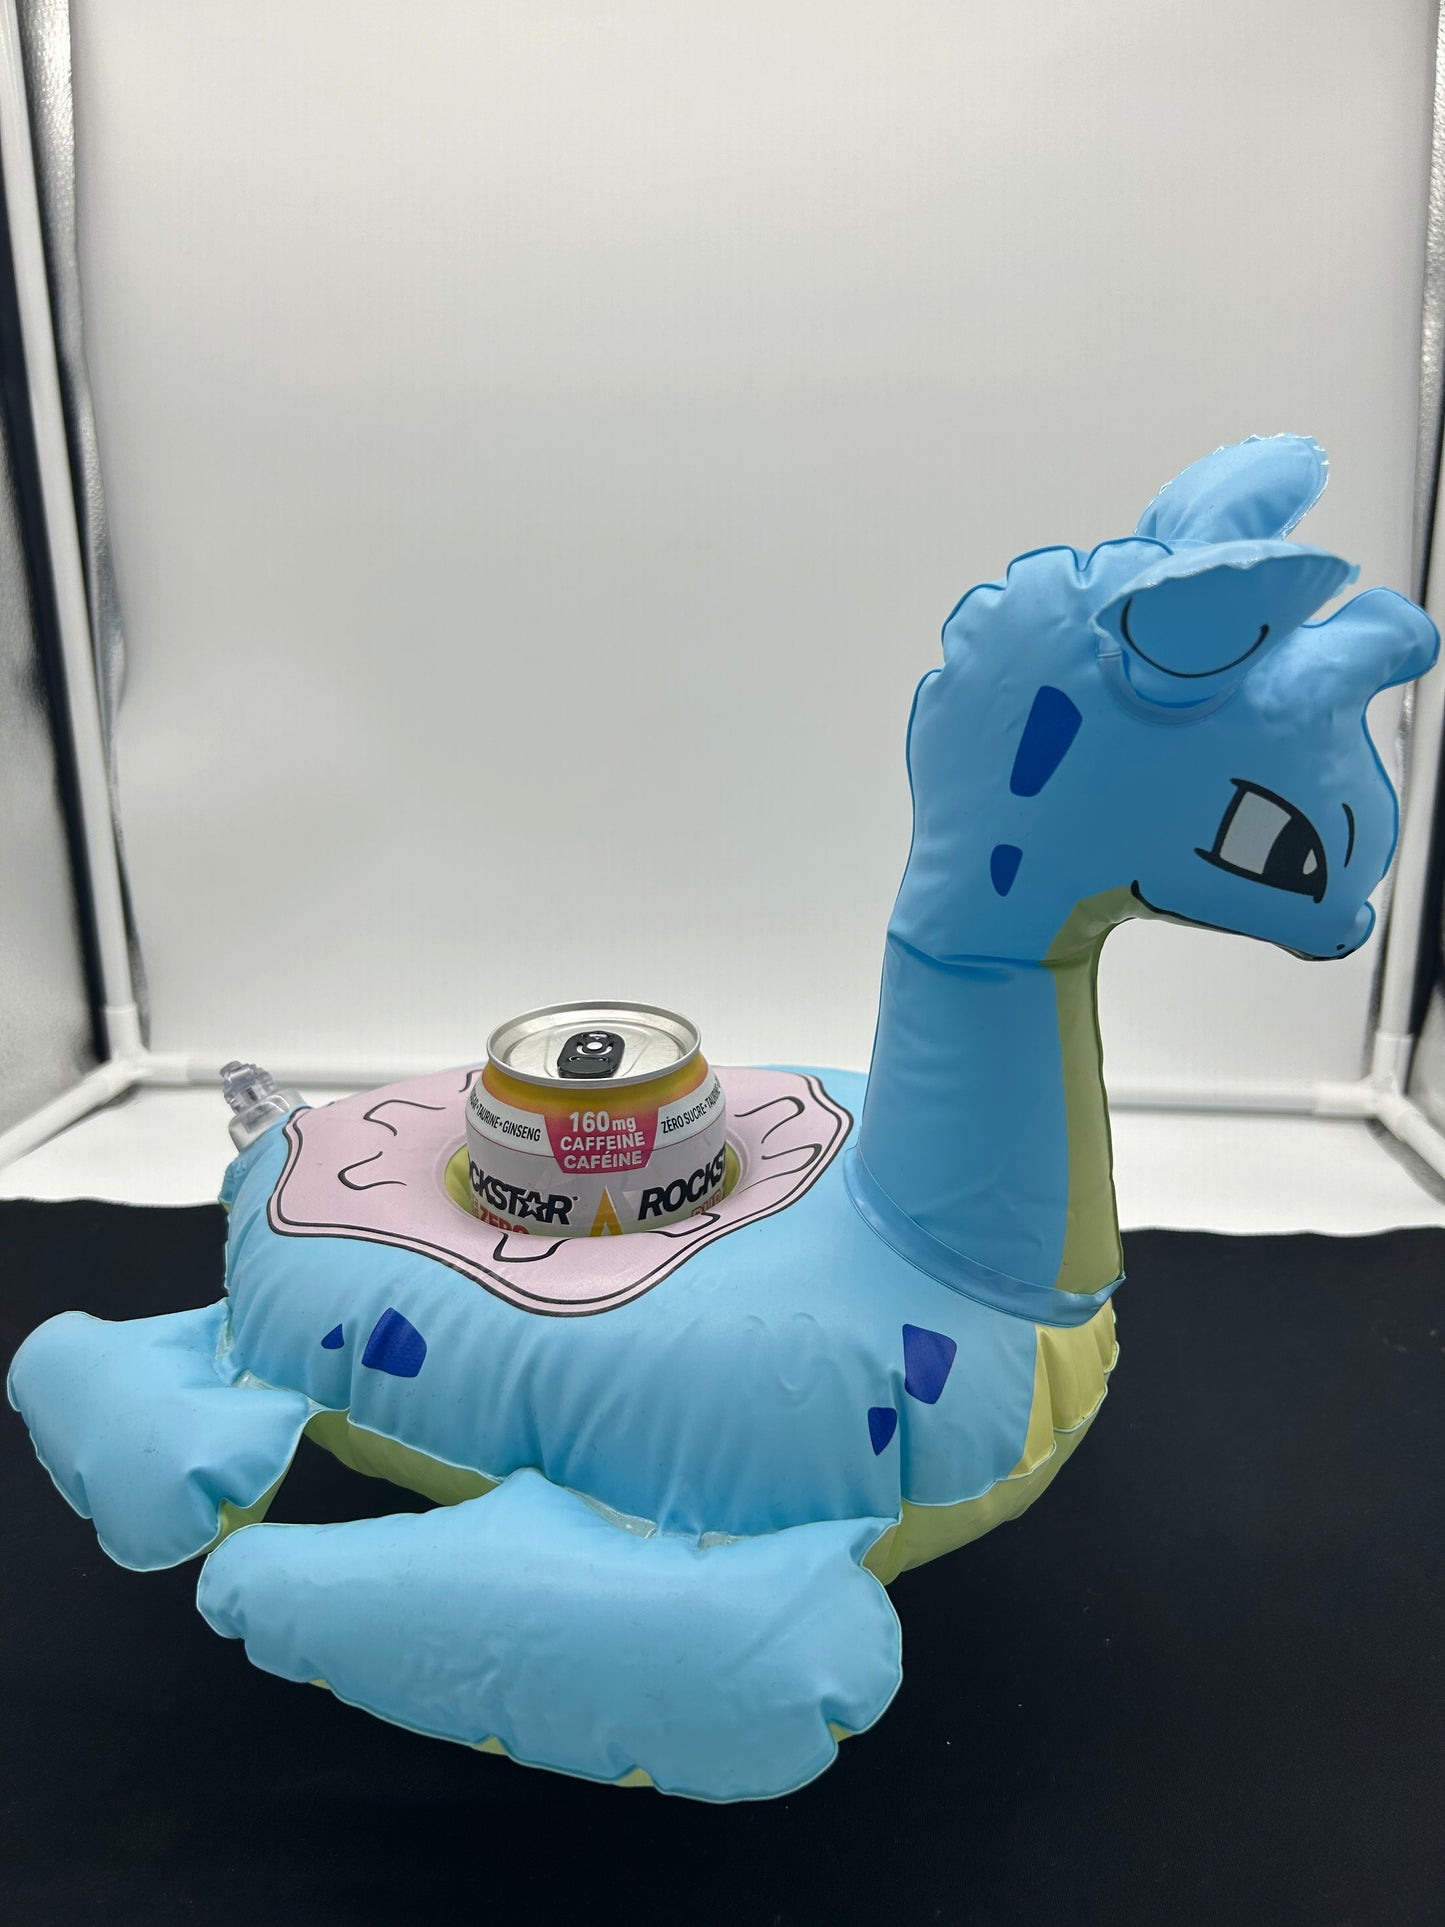 Inflatable floating lapras can holder auction